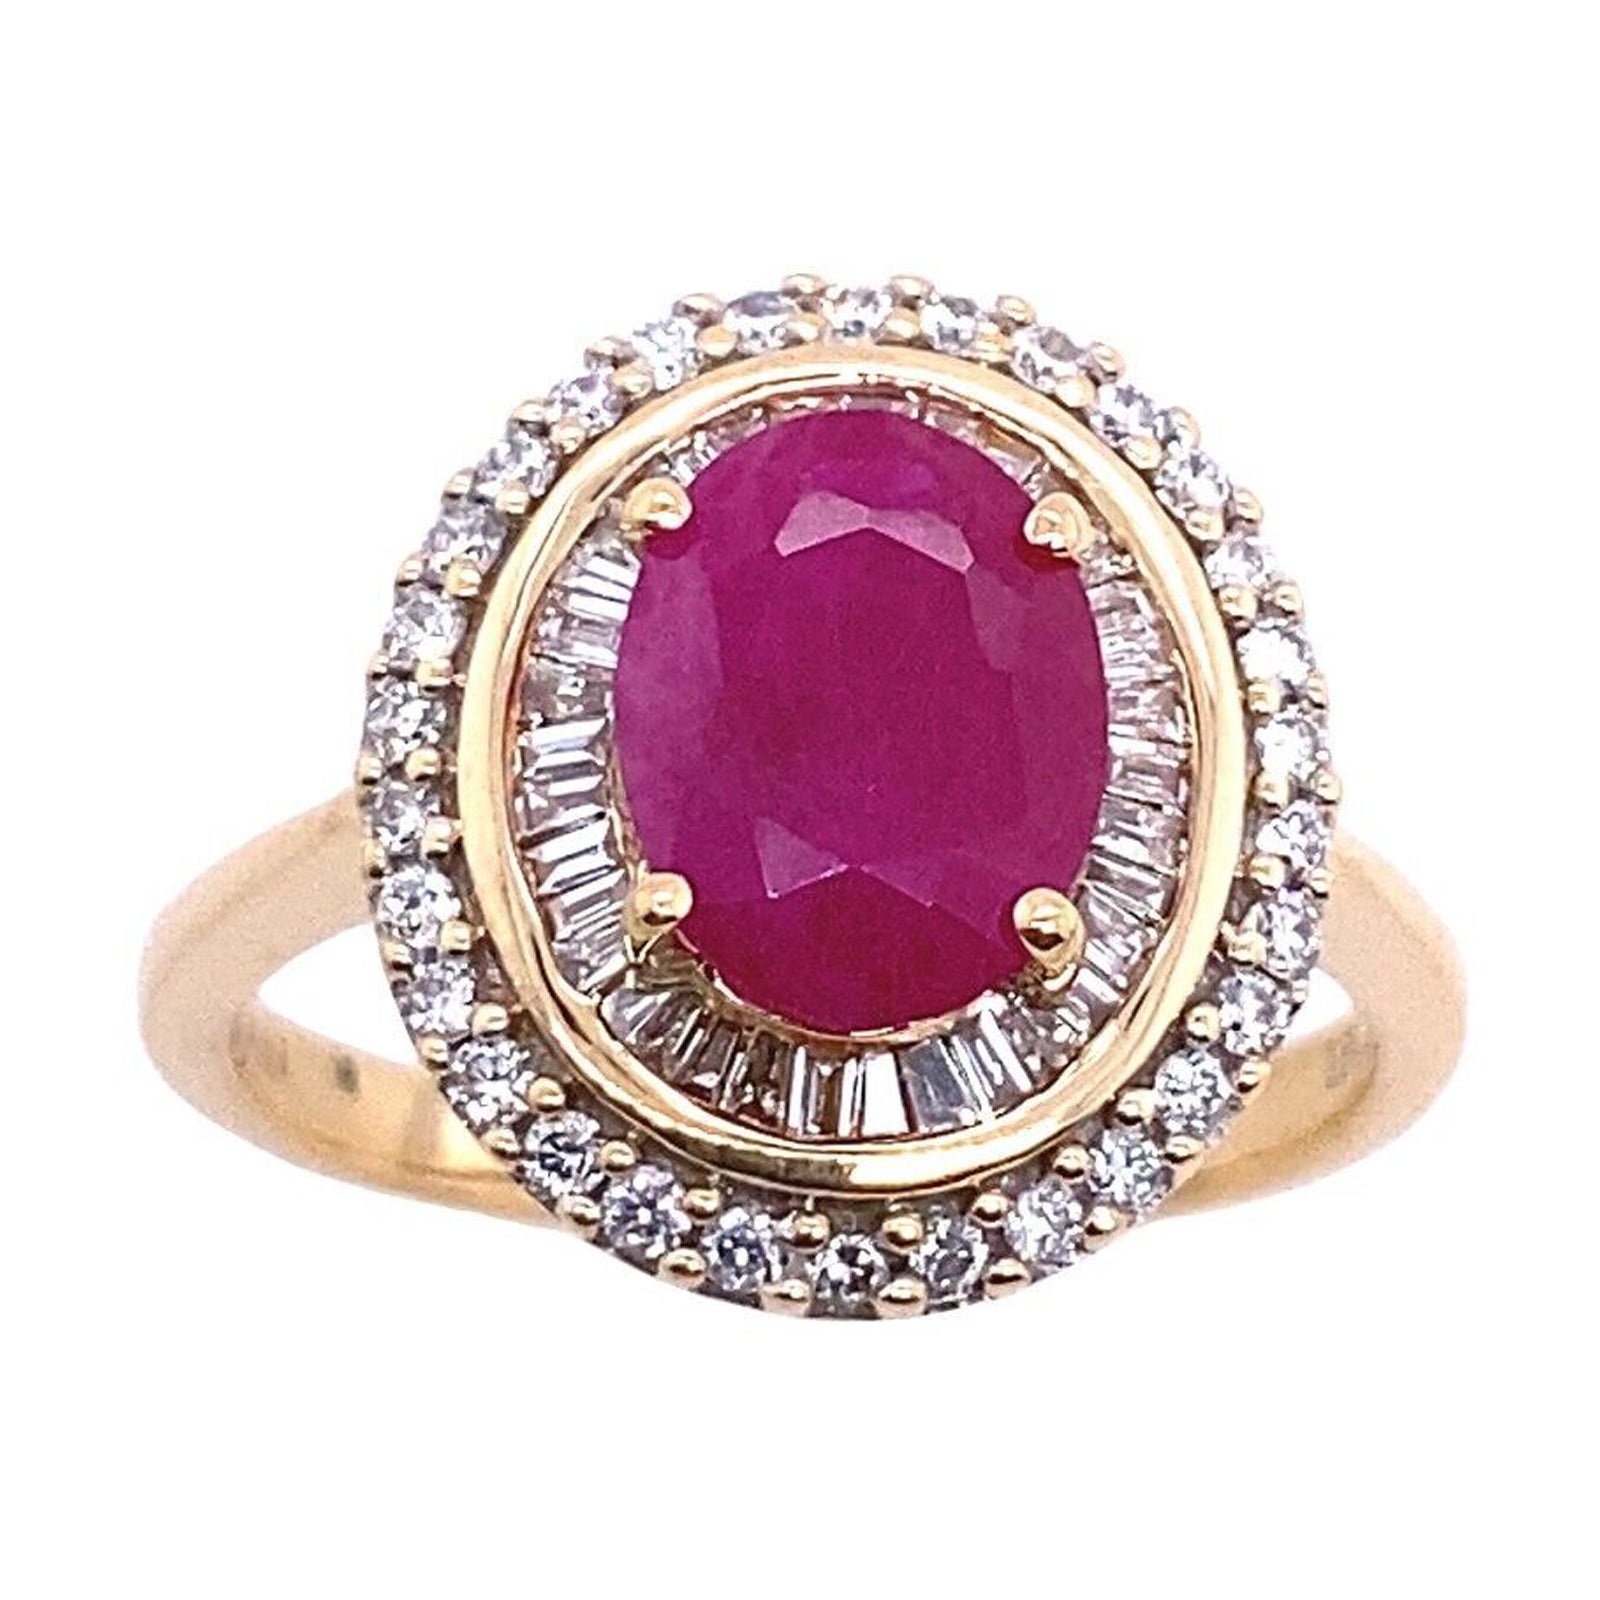 18ct Oval 1.50ct Ruby Ring Surrounded by 1 Row of Baguettes + Round Diamonds